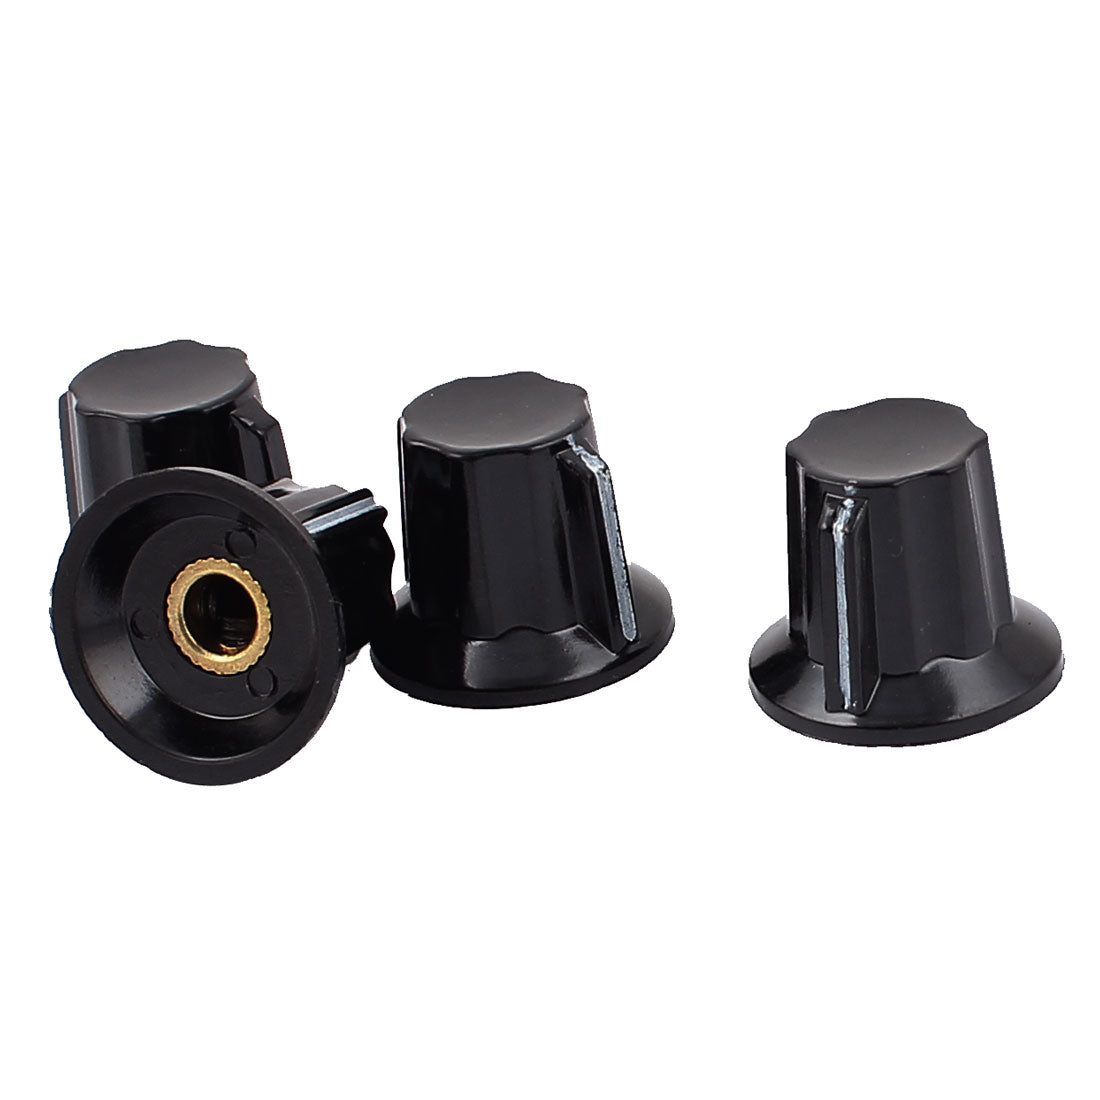 uxcell Uxcell 4Pcs 17mm Top Dia 6mm Shaft Potentiometer Volume Control Knobs